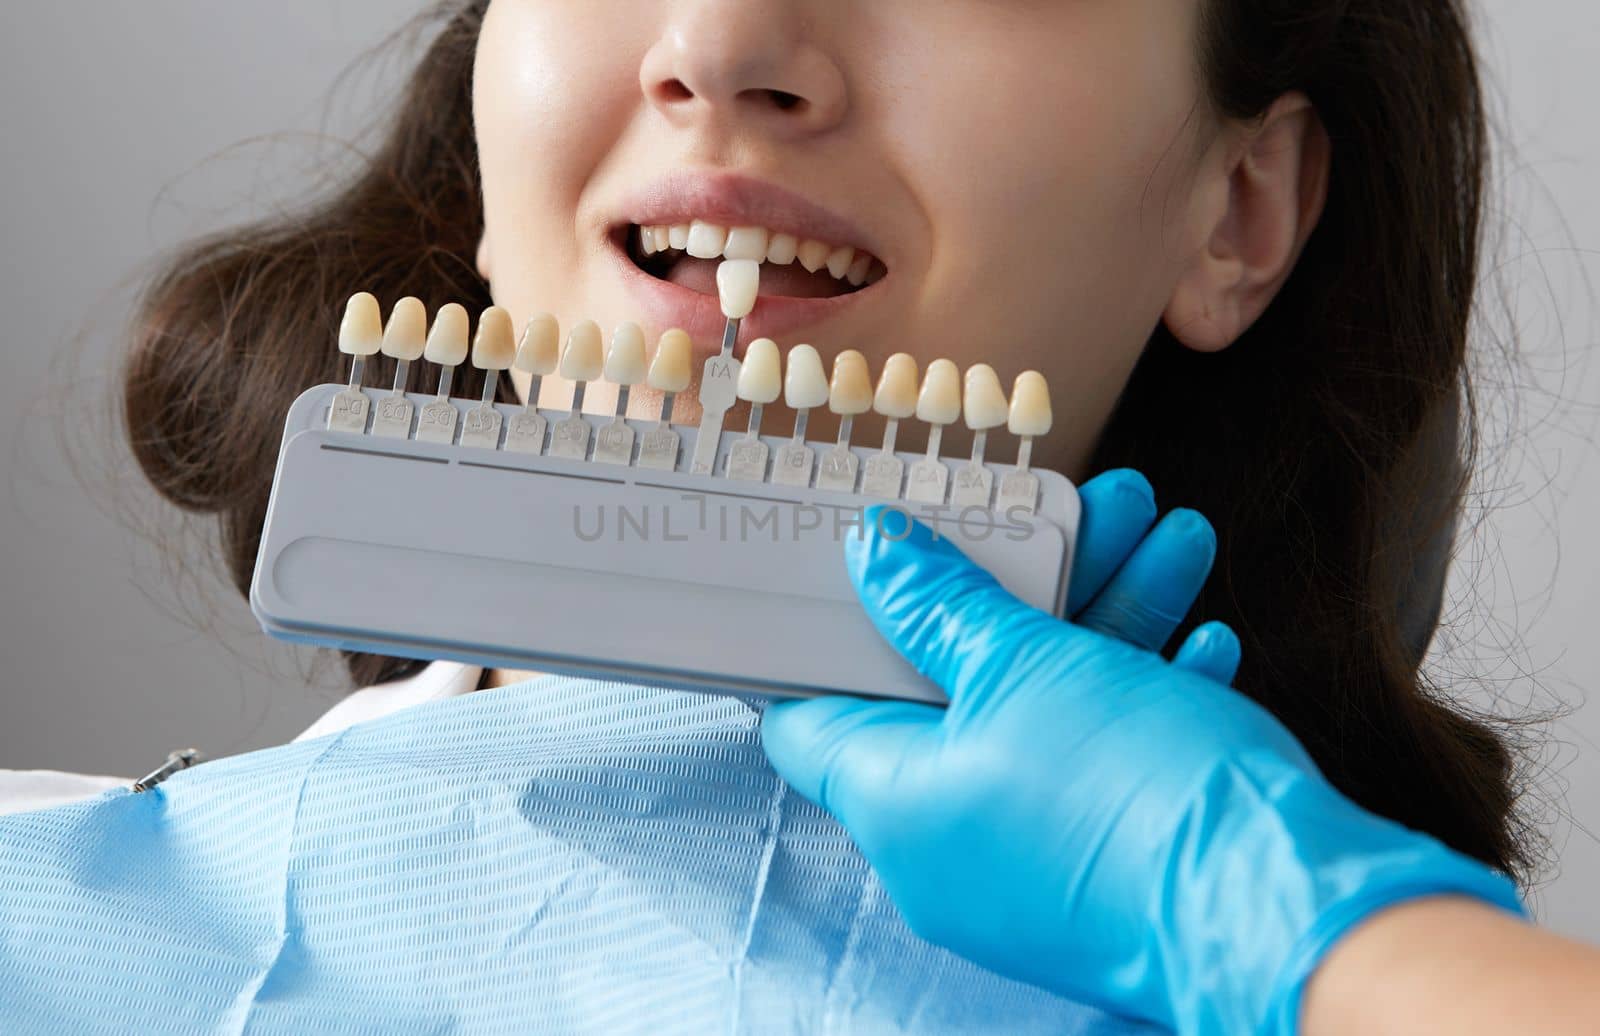 Dentist choosing color of tooth enamel for patient. Dentist applying sample from tooth enamel scale to caucasian female teeth by Mariakray